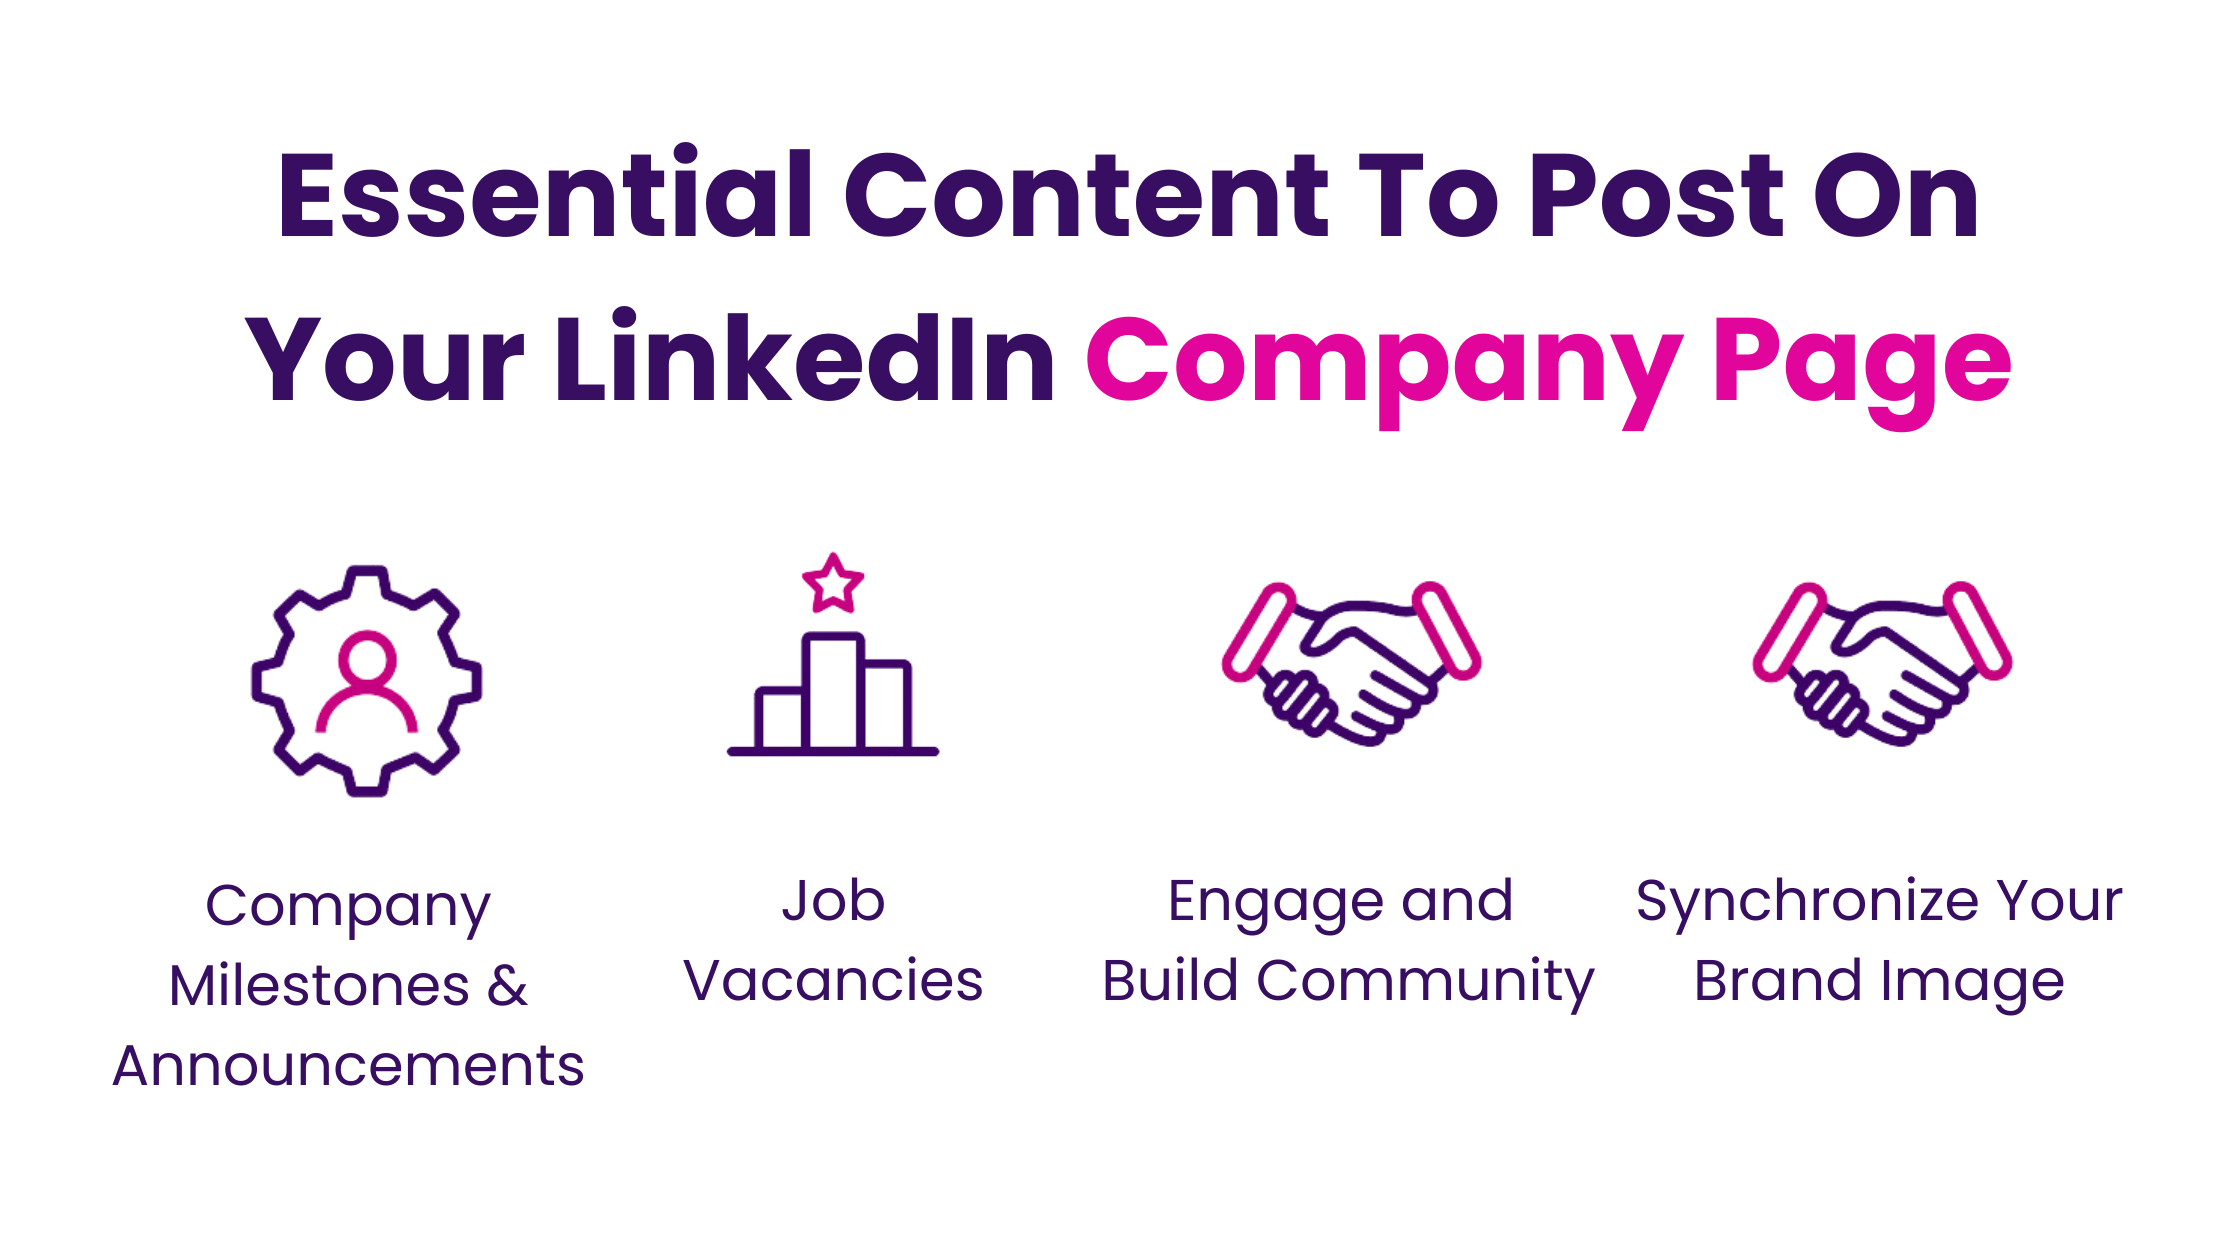 Essential Content To Post On Your LinkedIn Company Page